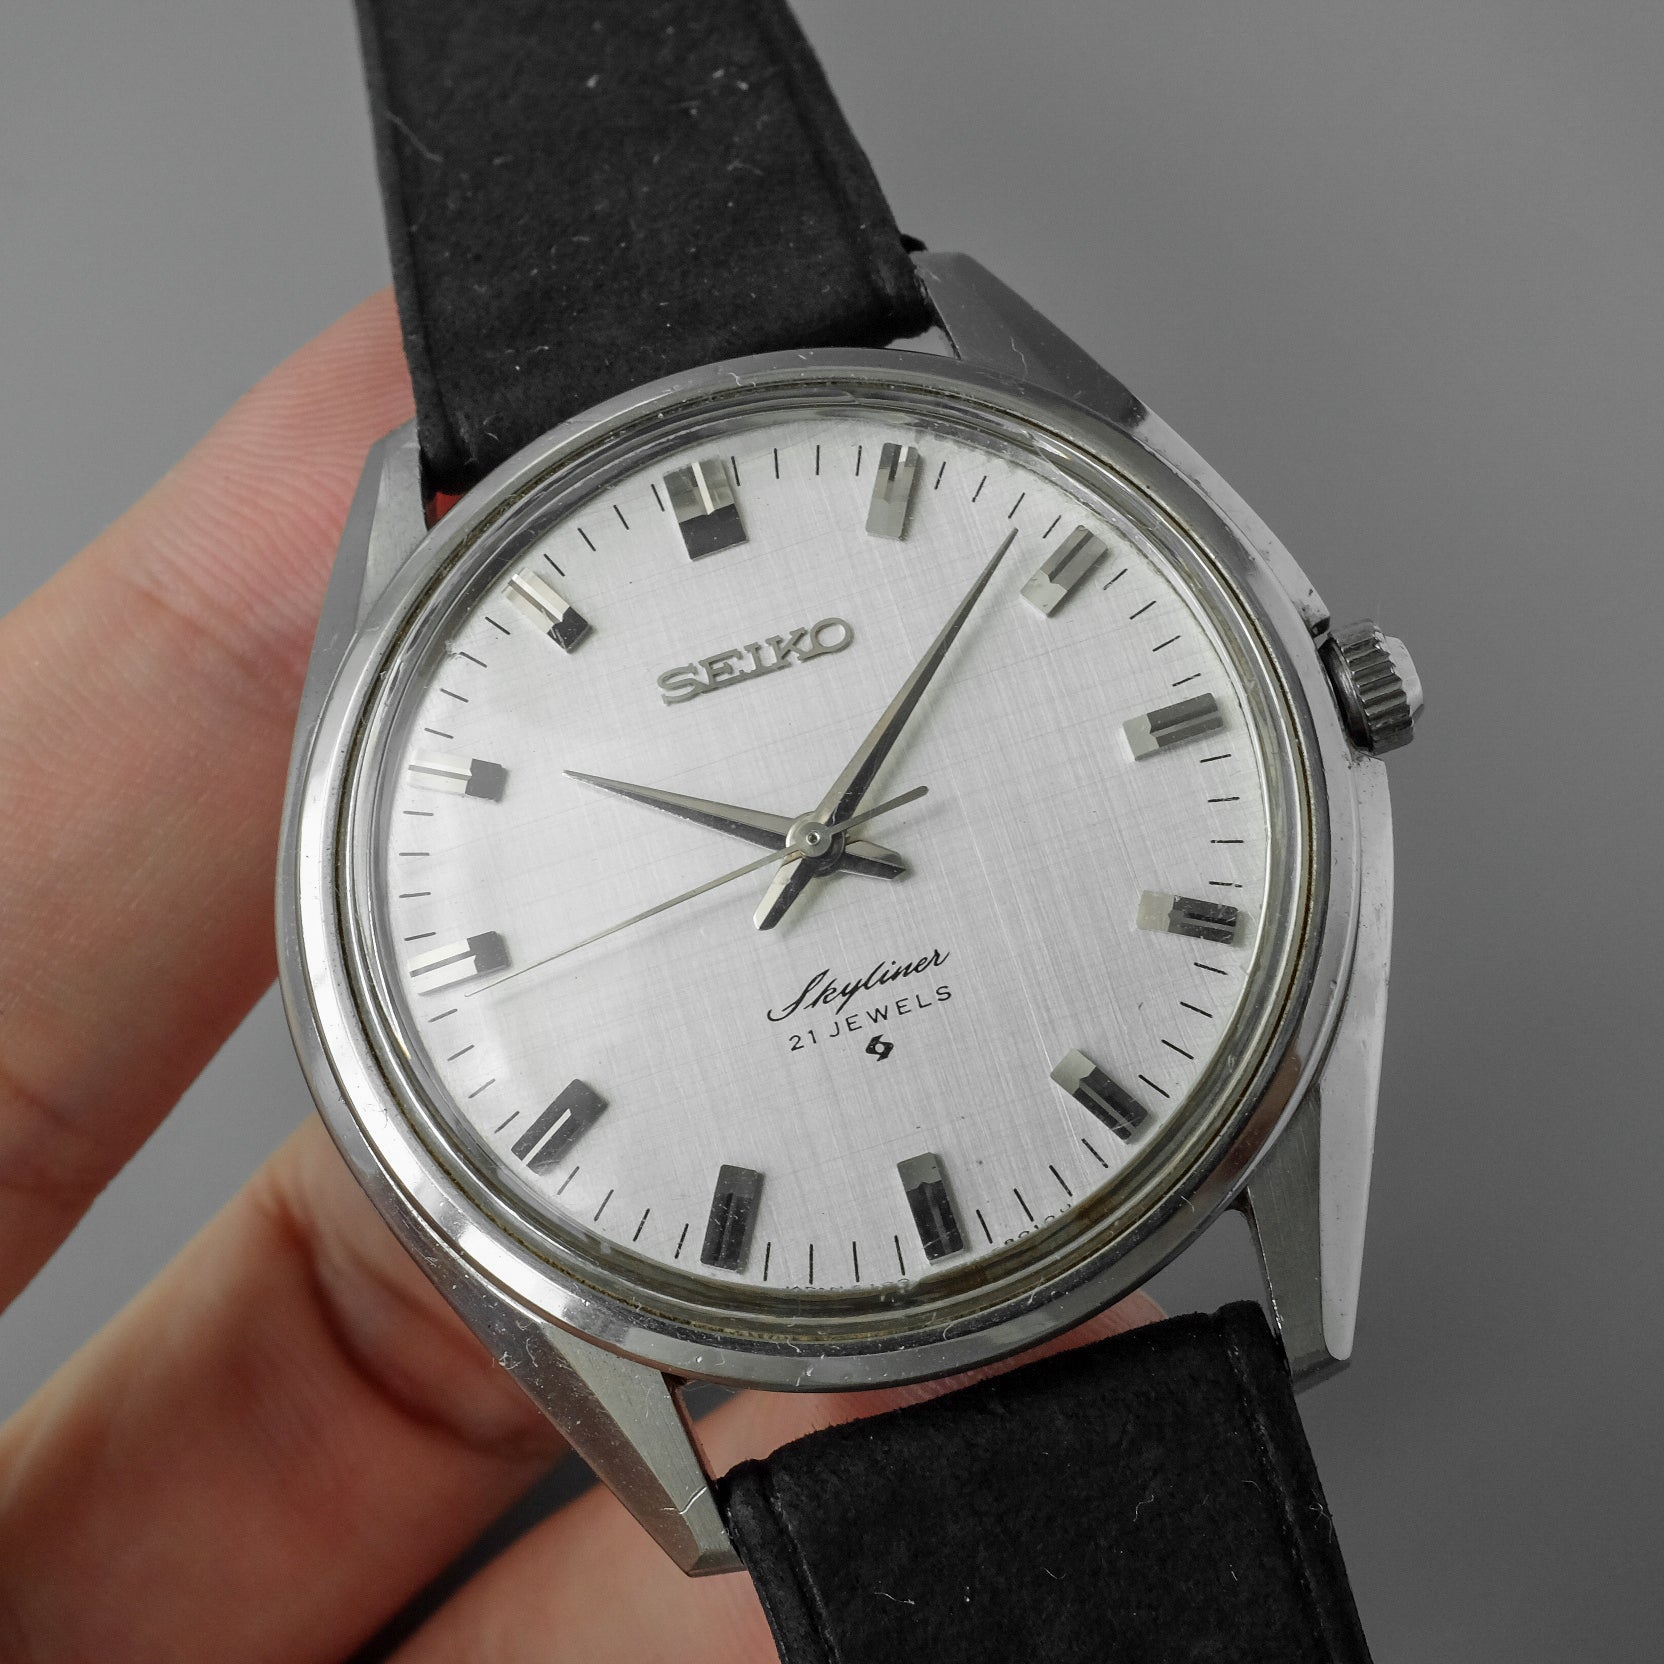 Seiko Skyliner 6100-8000 from 1968